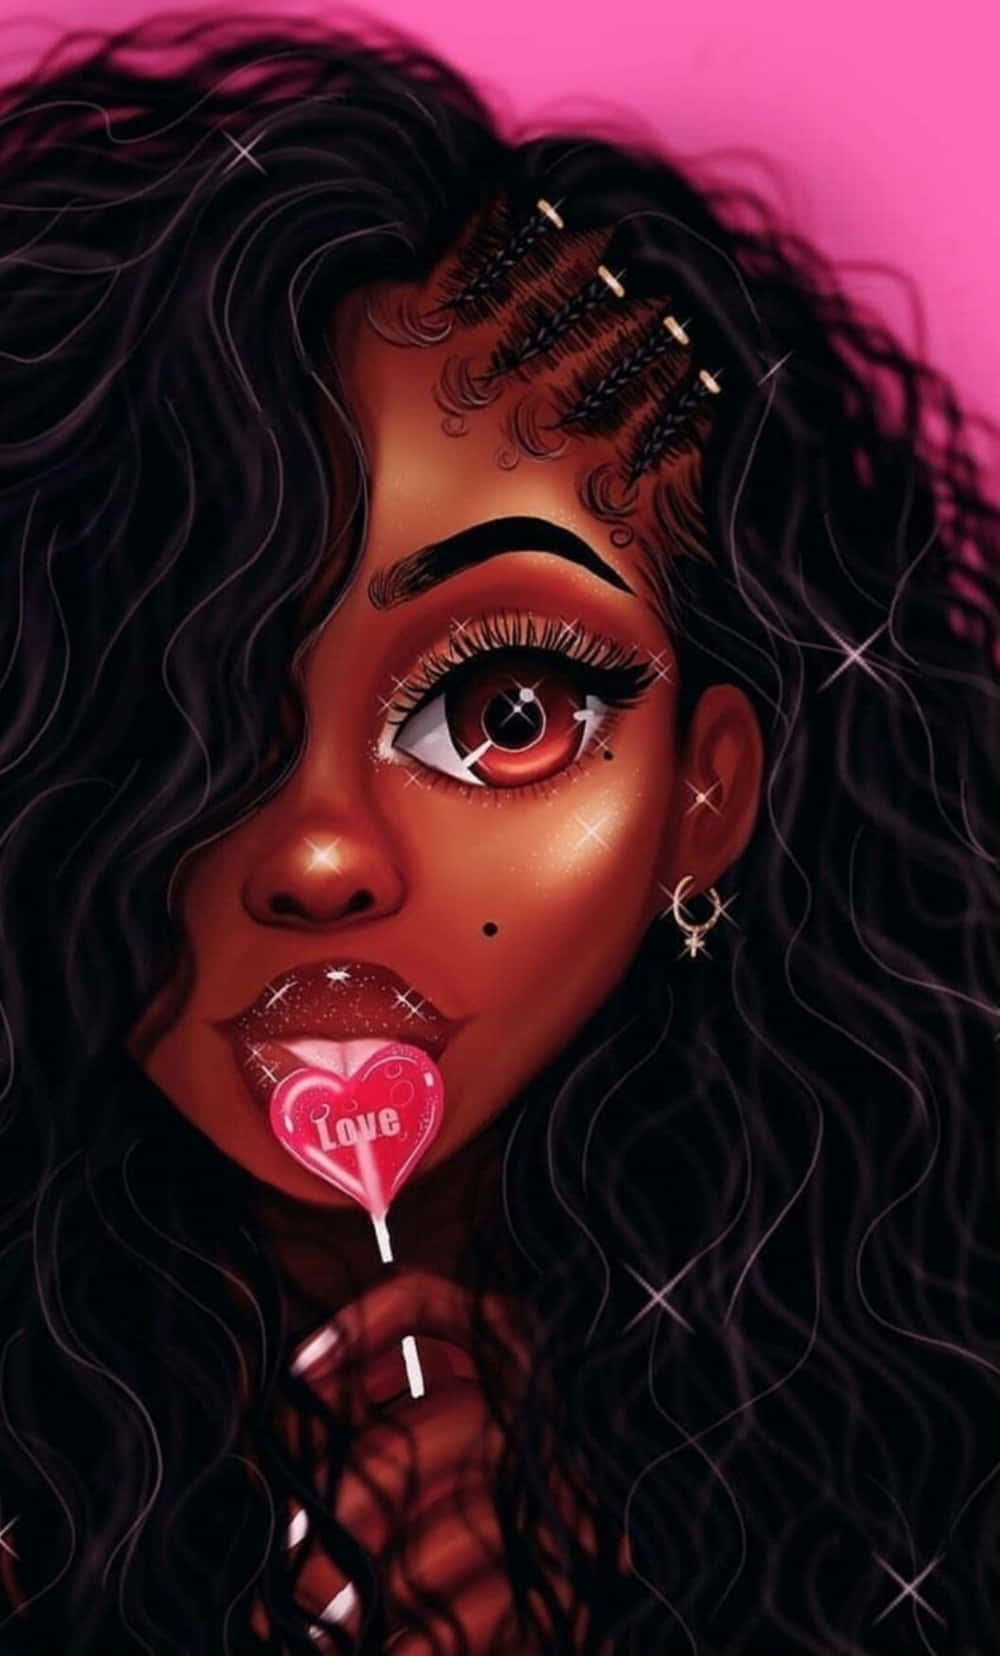 A Black Girl With Long Hair And A Lollipop Wallpaper